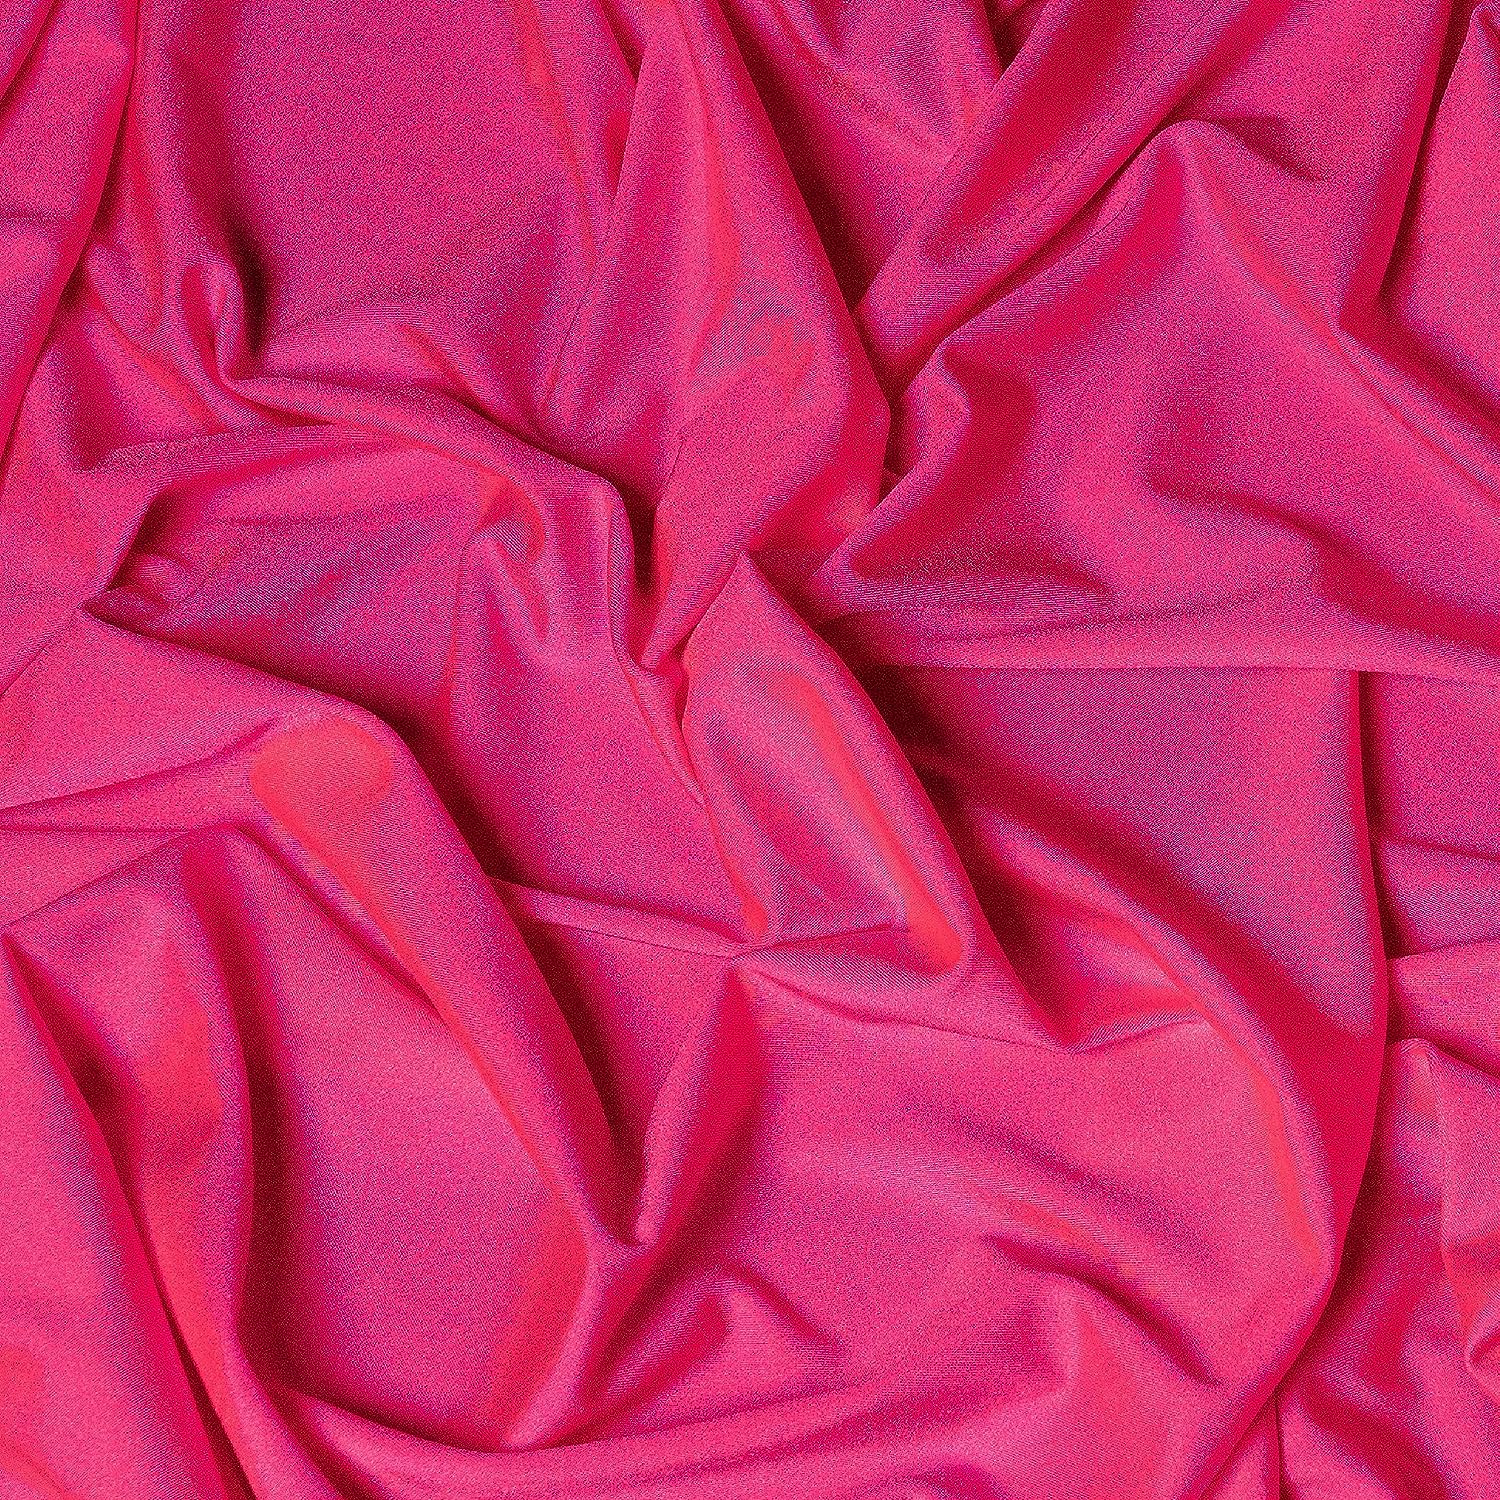 Neon Pink Luxury Nylon Spandex Fabric By The YardICE FABRICSICE FABRICSBy The Yard (58" Width)Neon Pink Luxury Nylon Spandex Fabric By The Yard ICE FABRICS